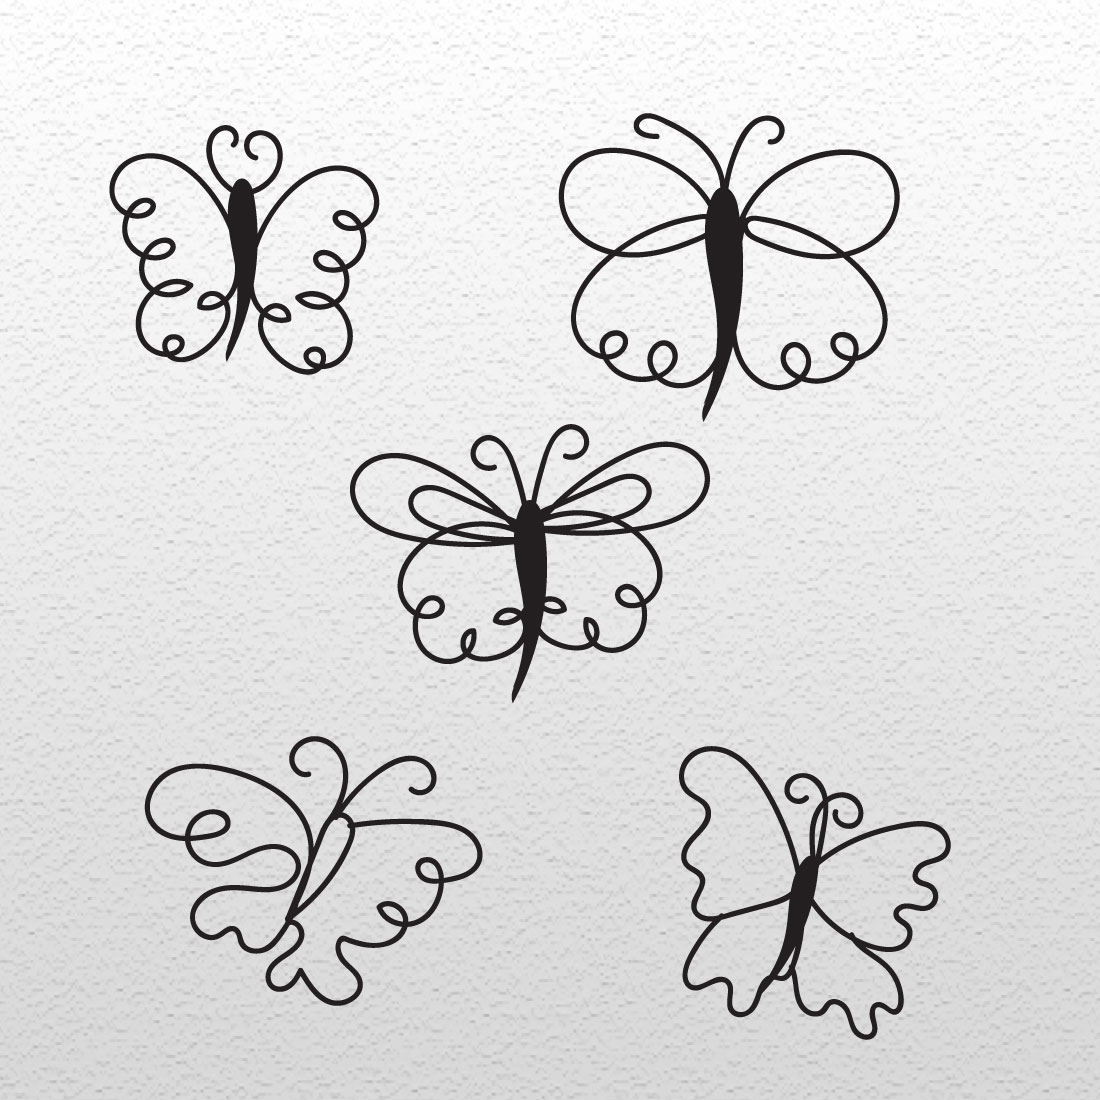 Set of four black butterflies on a white background.